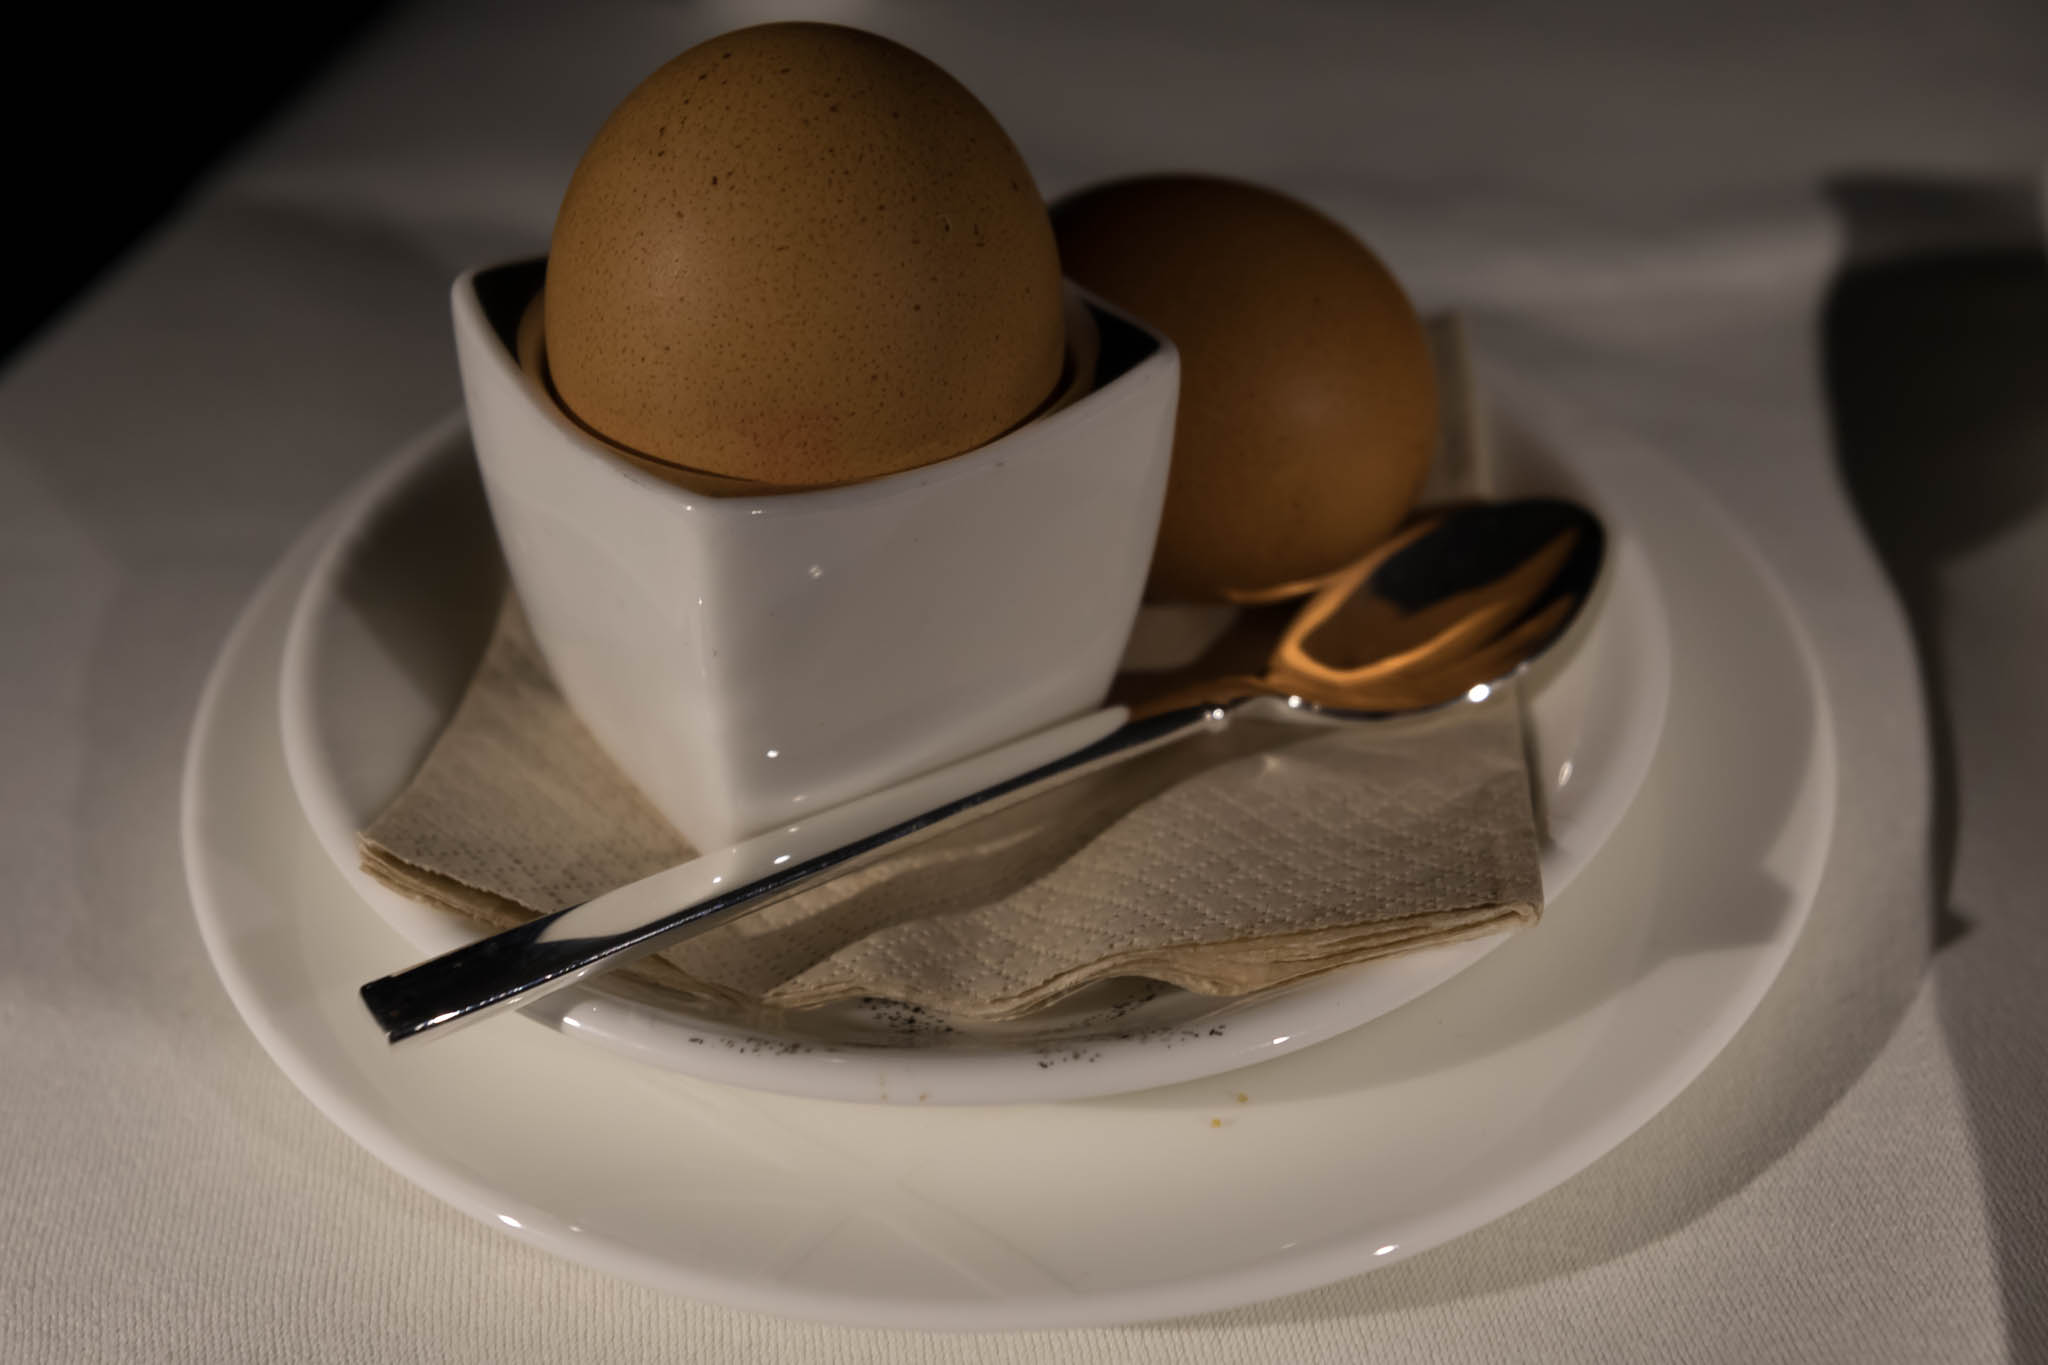 a egg in a cup on a plate